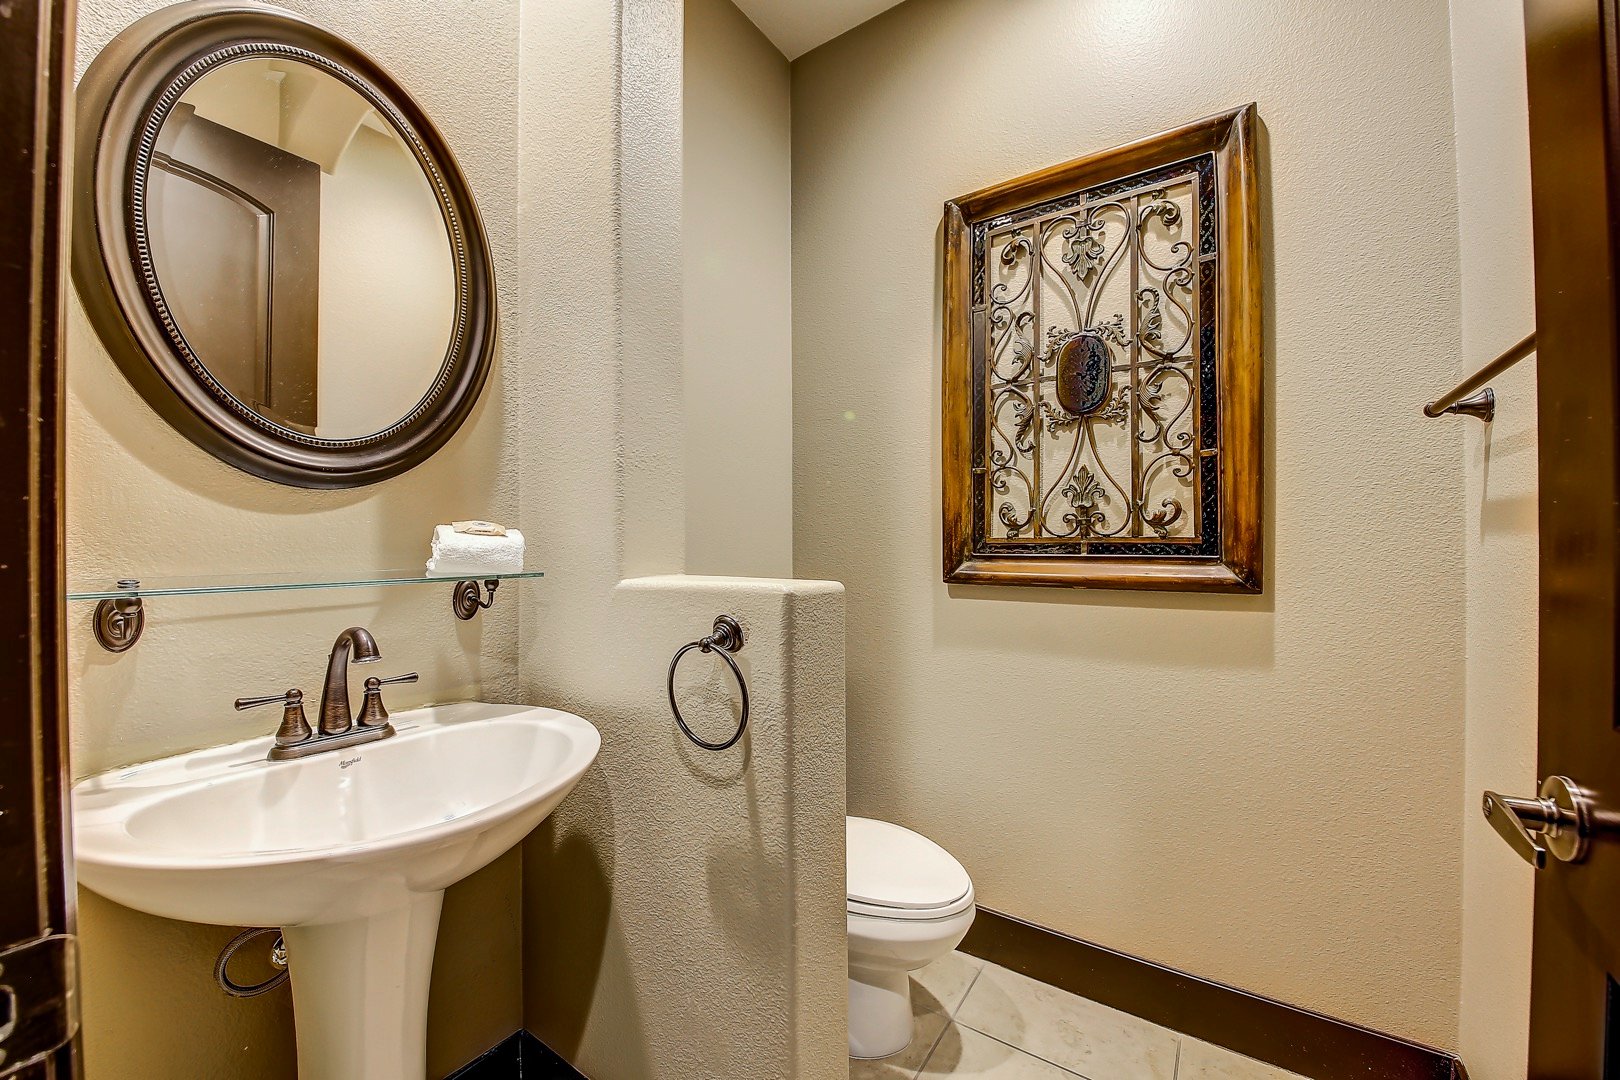 Powder room 5 is located at the hallway and features a pedestal sink.